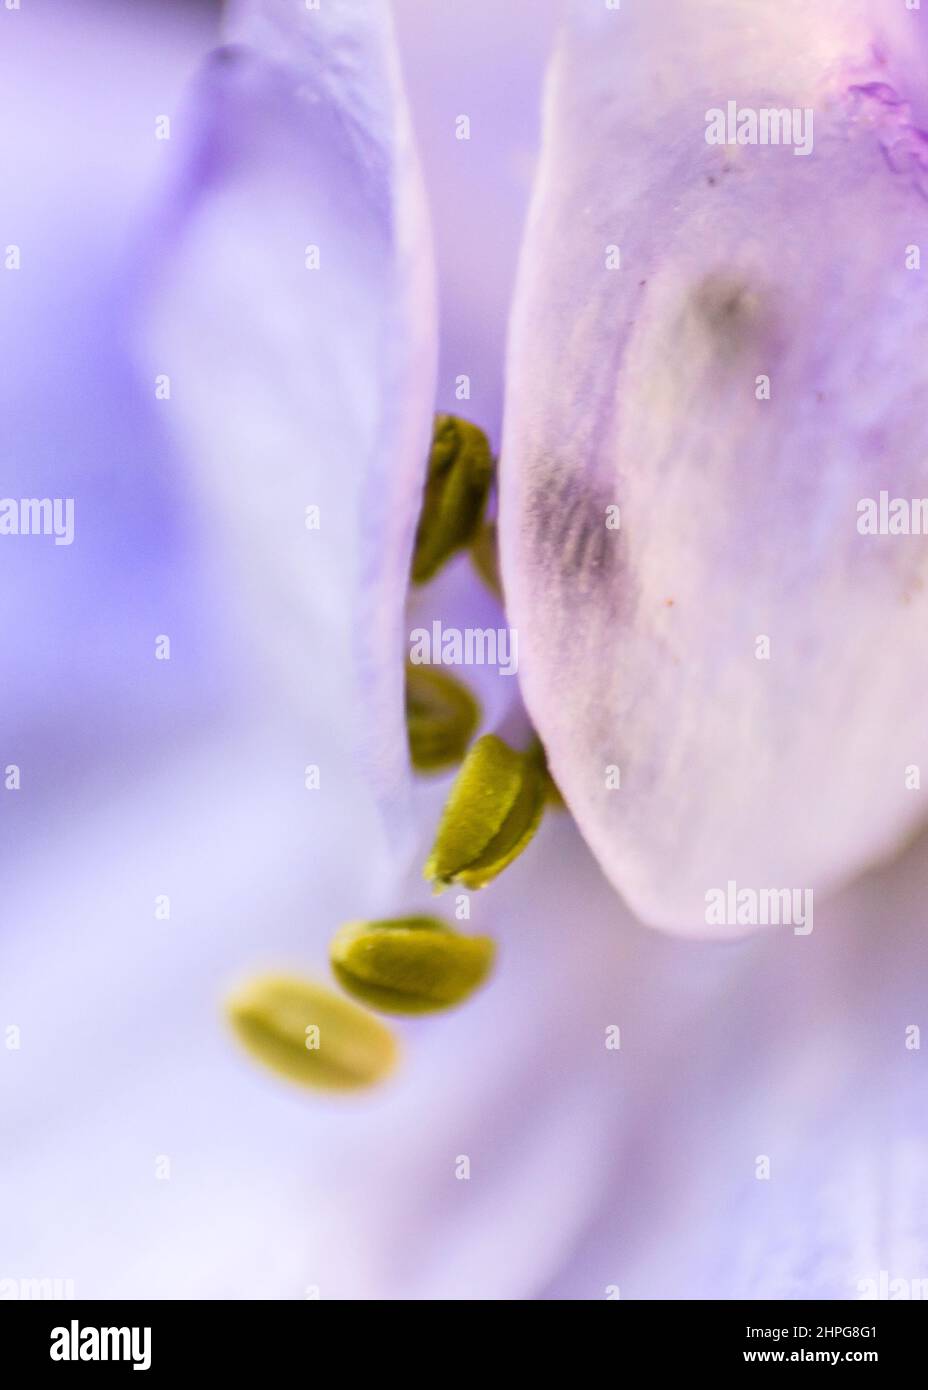 Floral Abstract Stock Photo